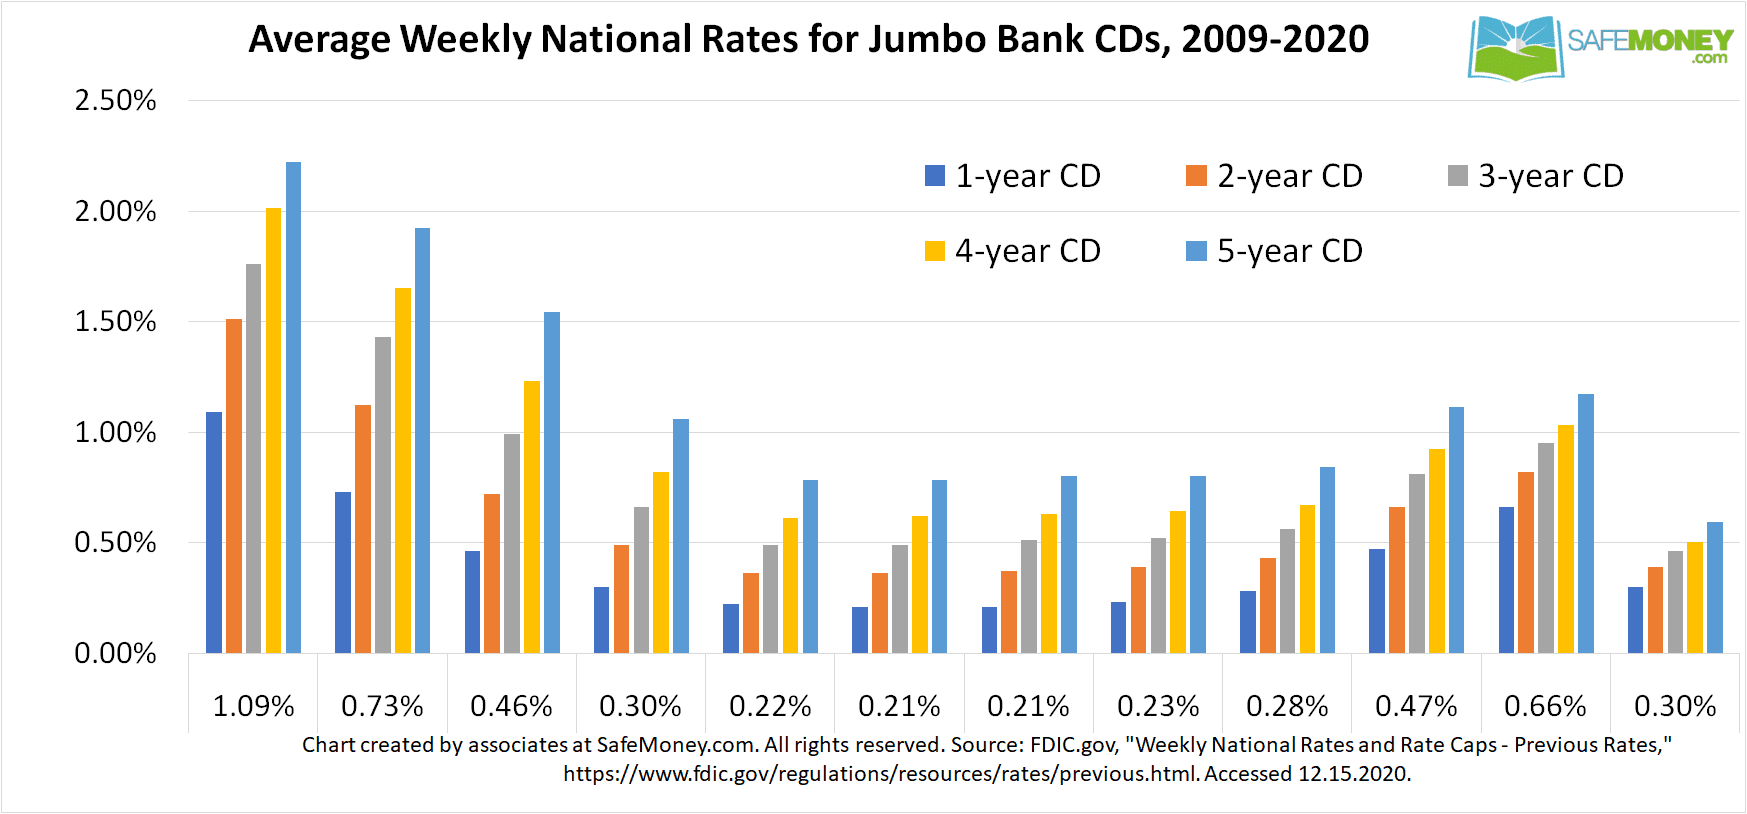 bank of america cd interest rates